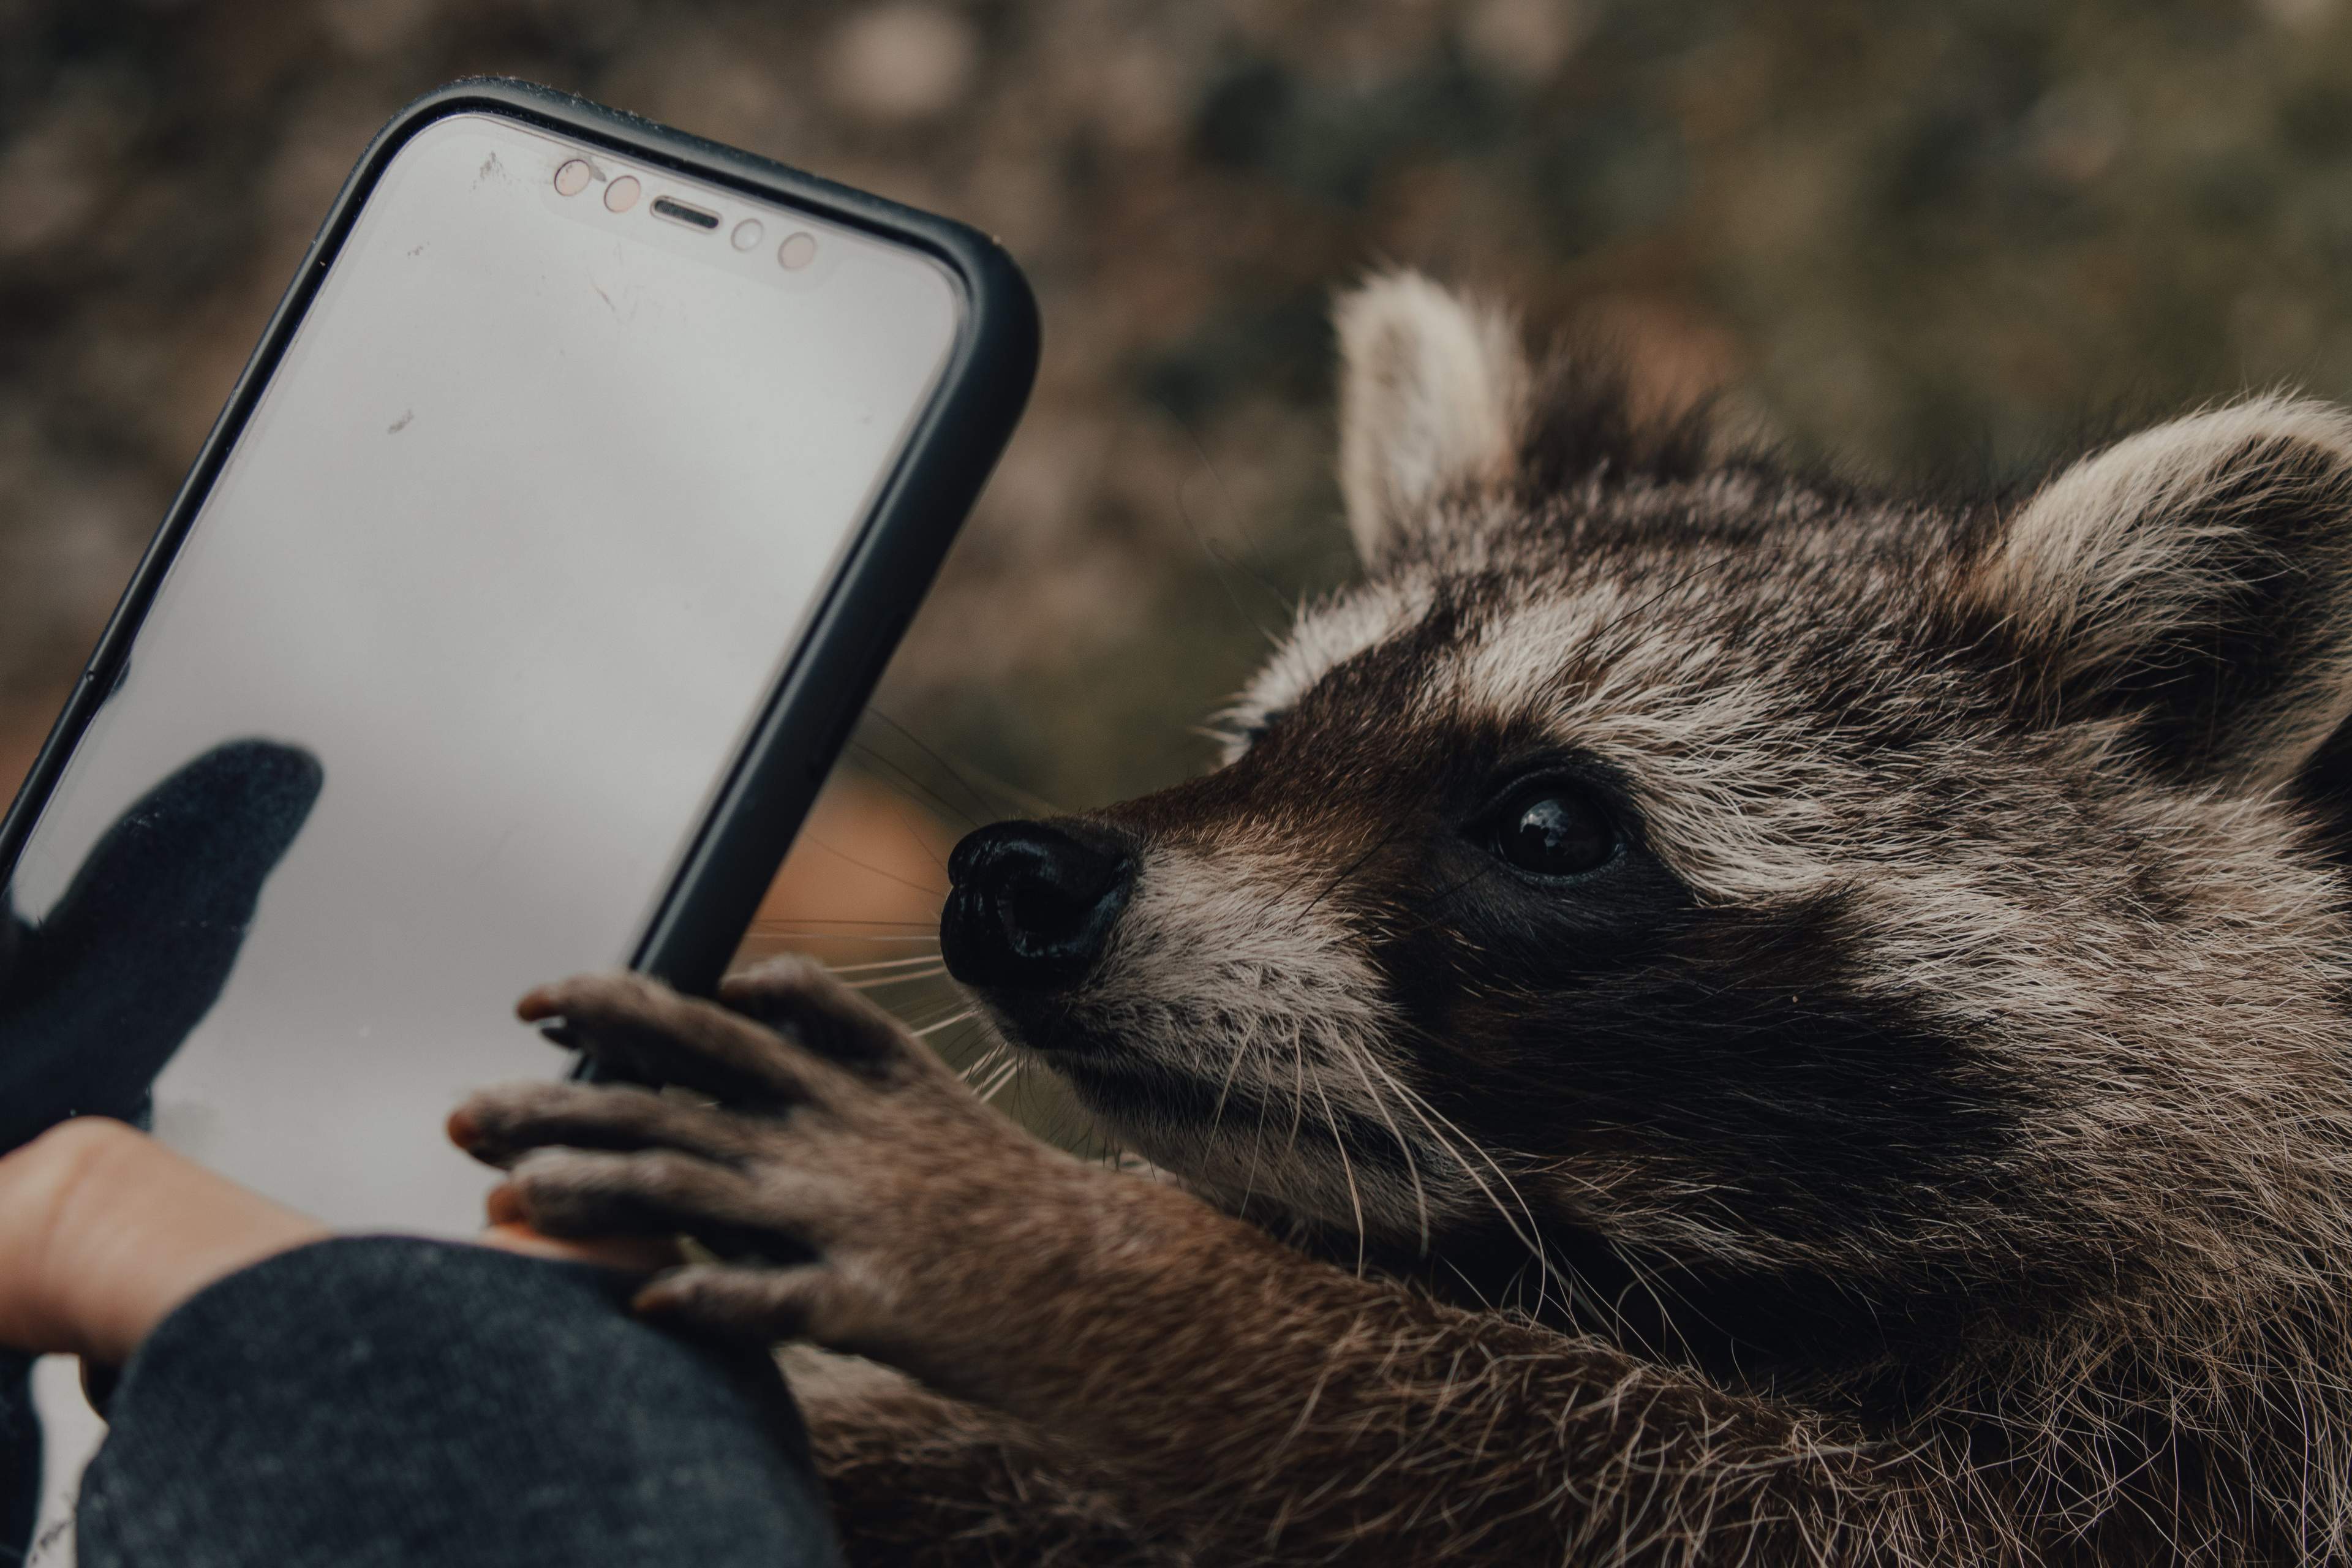 A cute raccoon is curiously reaching for a person's phone.